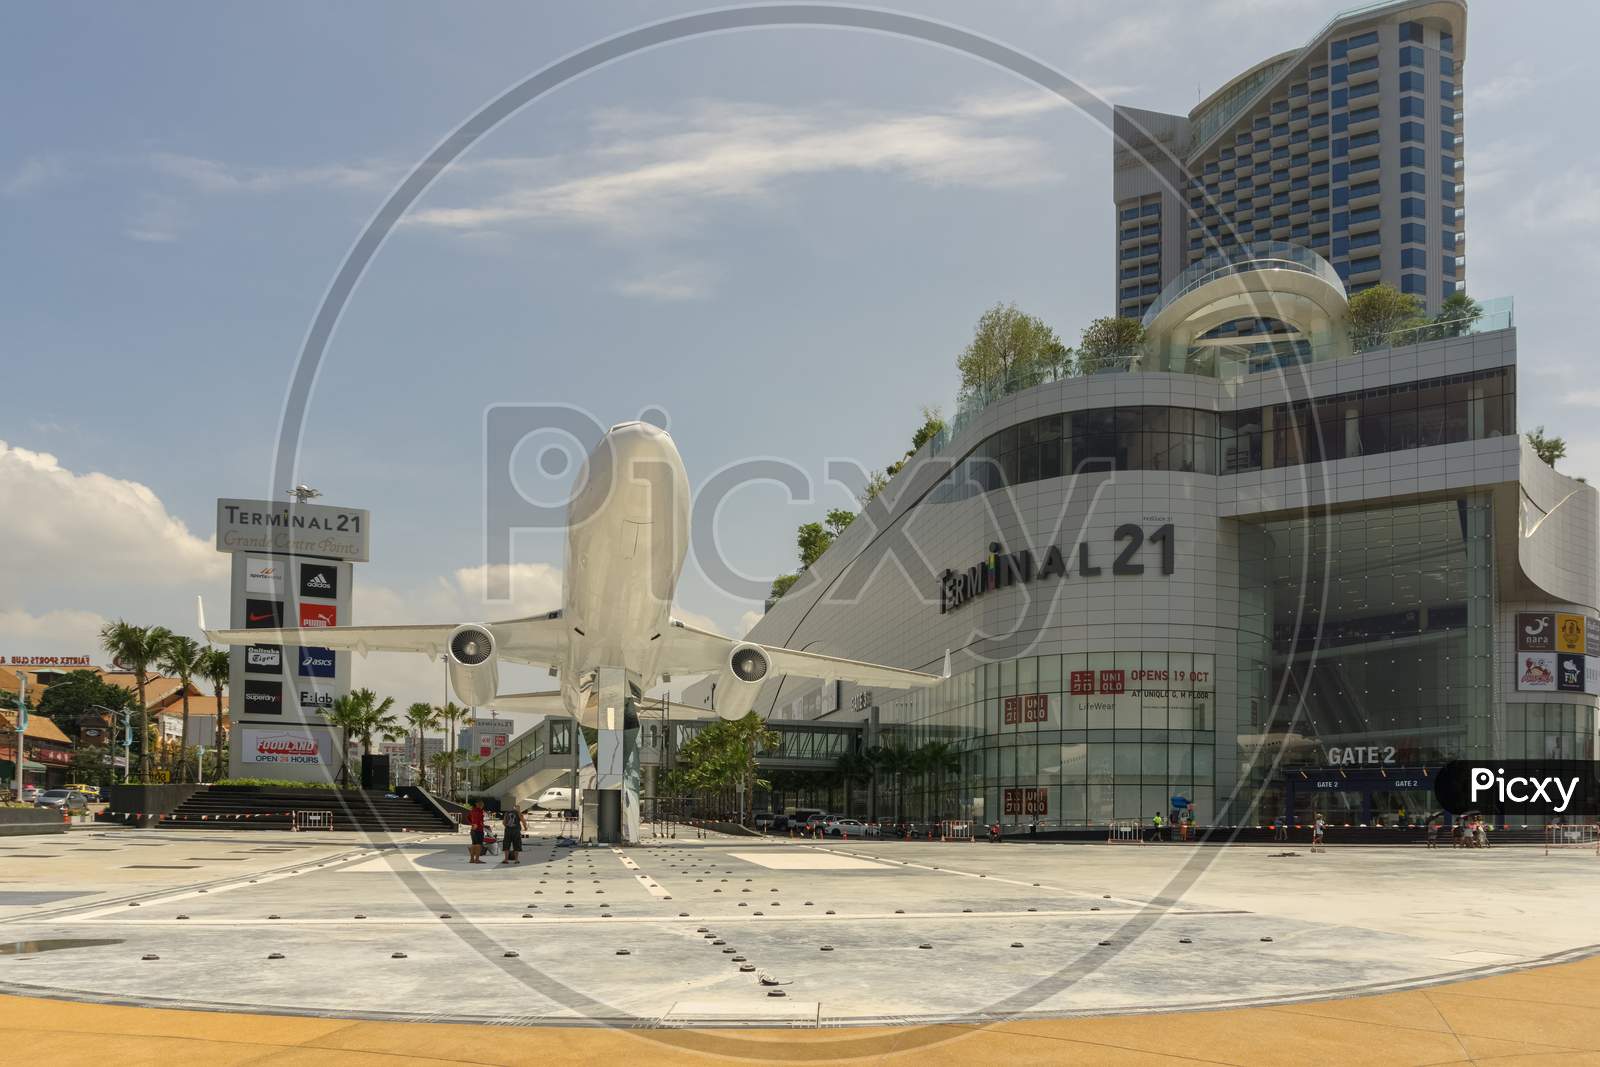 Pattaya,Thailand - October 13,2018: Terminal 21 This Is The Big,New Mall In Second Road Before The Opening Six Days Later. It Contains Many Shops,Restaurants And A Cinema.